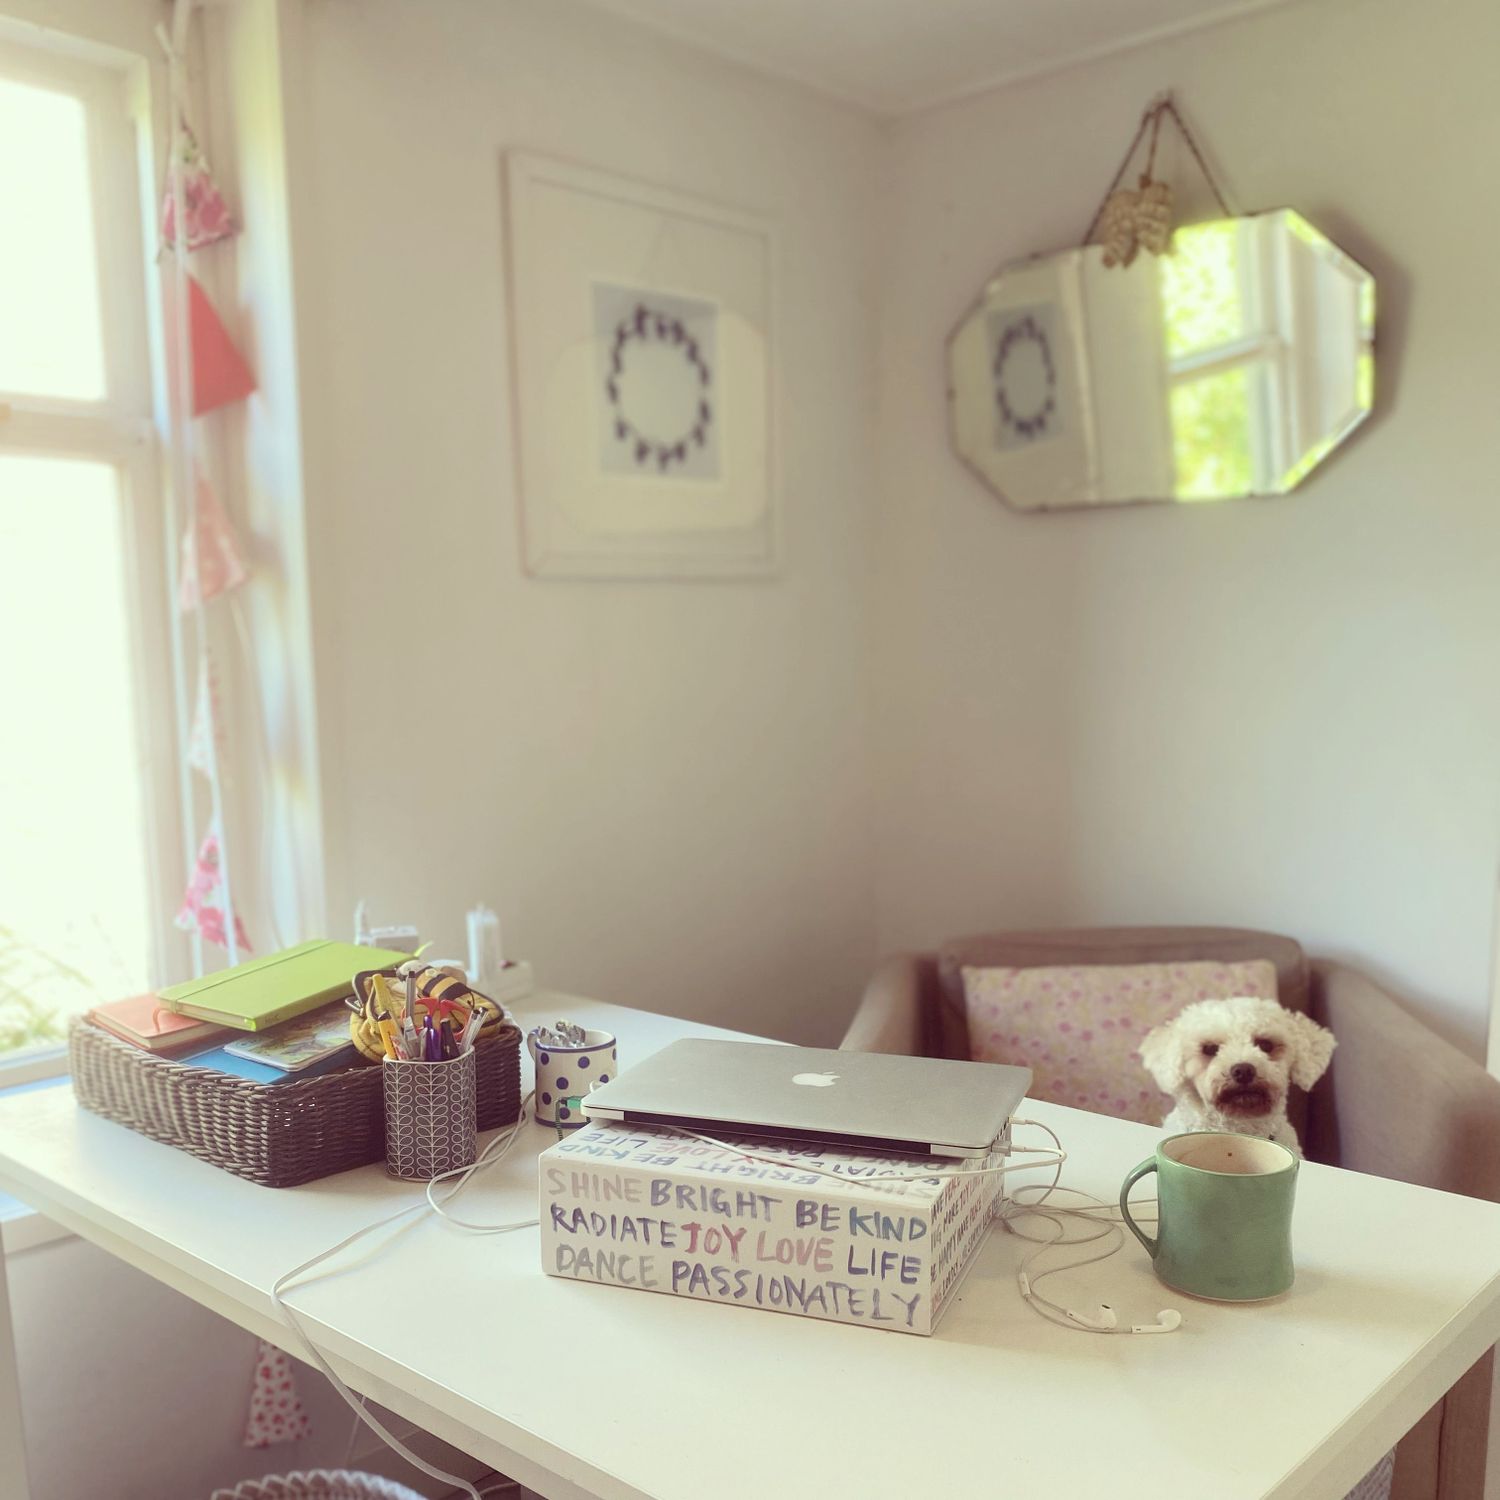 Gallery Photo of My therapy room (and sometimes office assistant, Daphne!)